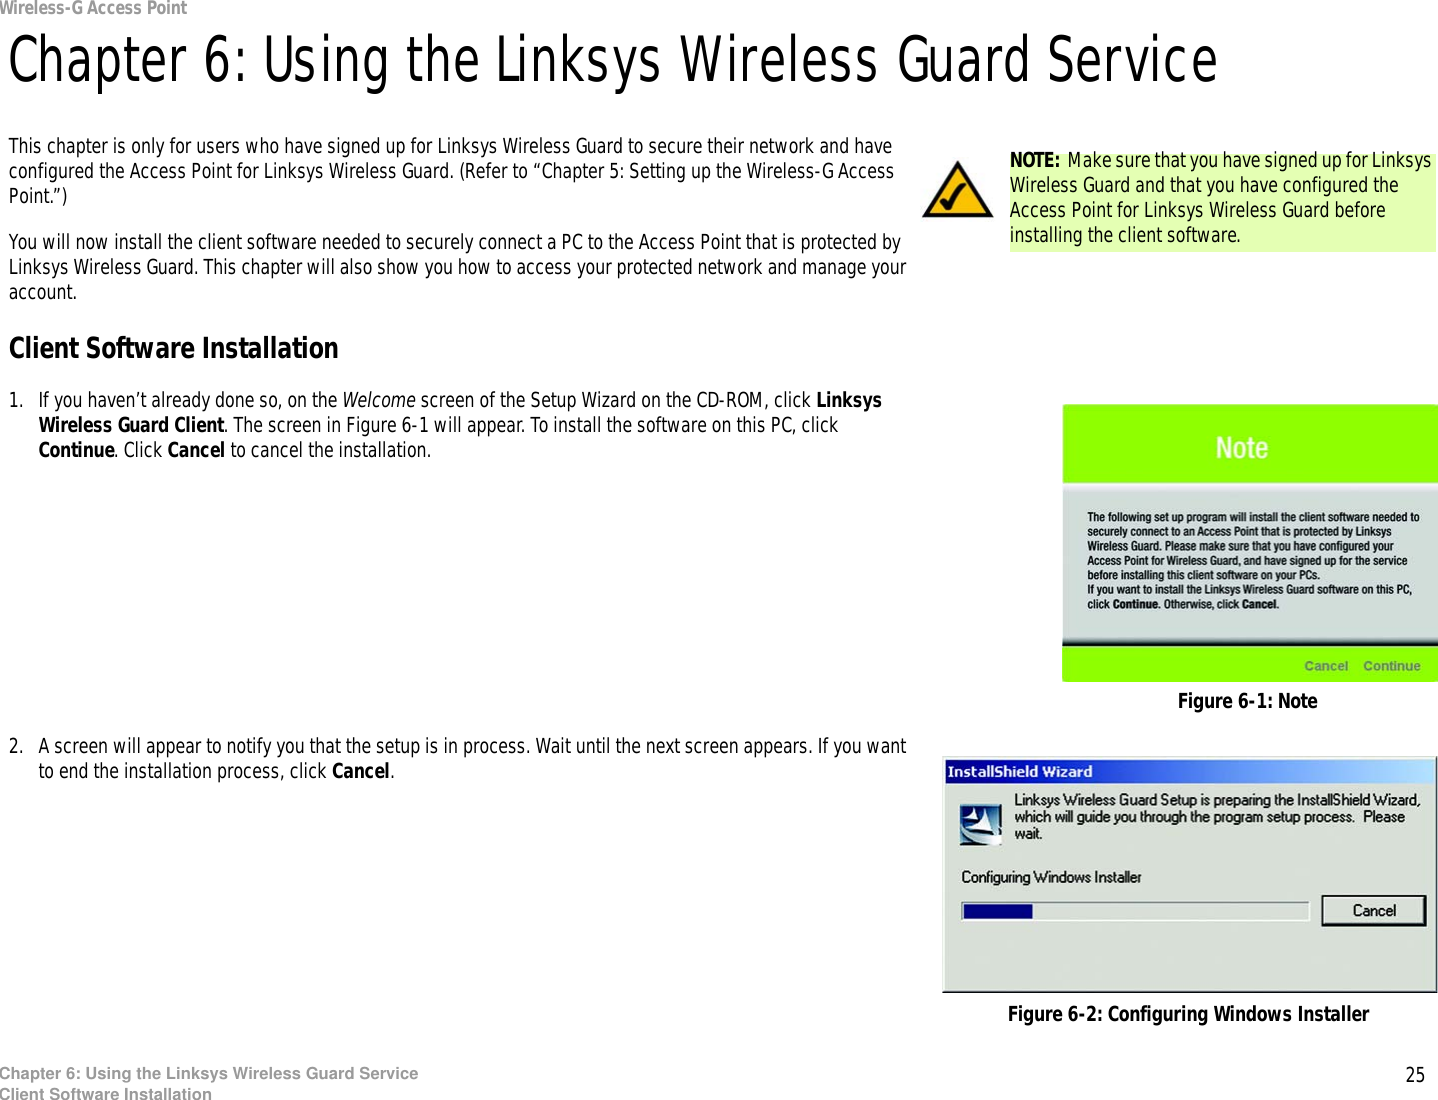 25Chapter 6: Using the Linksys Wireless Guard ServiceClient Software InstallationWireless-G Access PointChapter 6: Using the Linksys Wireless Guard ServiceThis chapter is only for users who have signed up for Linksys Wireless Guard to secure their network and have configured the Access Point for Linksys Wireless Guard. (Refer to “Chapter 5: Setting up the Wireless-G Access Point.”)You will now install the client software needed to securely connect a PC to the Access Point that is protected by Linksys Wireless Guard. This chapter will also show you how to access your protected network and manage your account.Client Software Installation1. If you haven’t already done so, on the Welcome screen of the Setup Wizard on the CD-ROM, click Linksys Wireless Guard Client. The screen in Figure 6-1 will appear. To install the software on this PC, click Continue. Click Cancel to cancel the installation.2. A screen will appear to notify you that the setup is in process. Wait until the next screen appears. If you want to end the installation process, click Cancel.Figure 6-1: NoteNOTE: Make sure that you have signed up for Linksys Wireless Guard and that you have configured the Access Point for Linksys Wireless Guard before installing the client software.Figure 6-2: Configuring Windows Installer